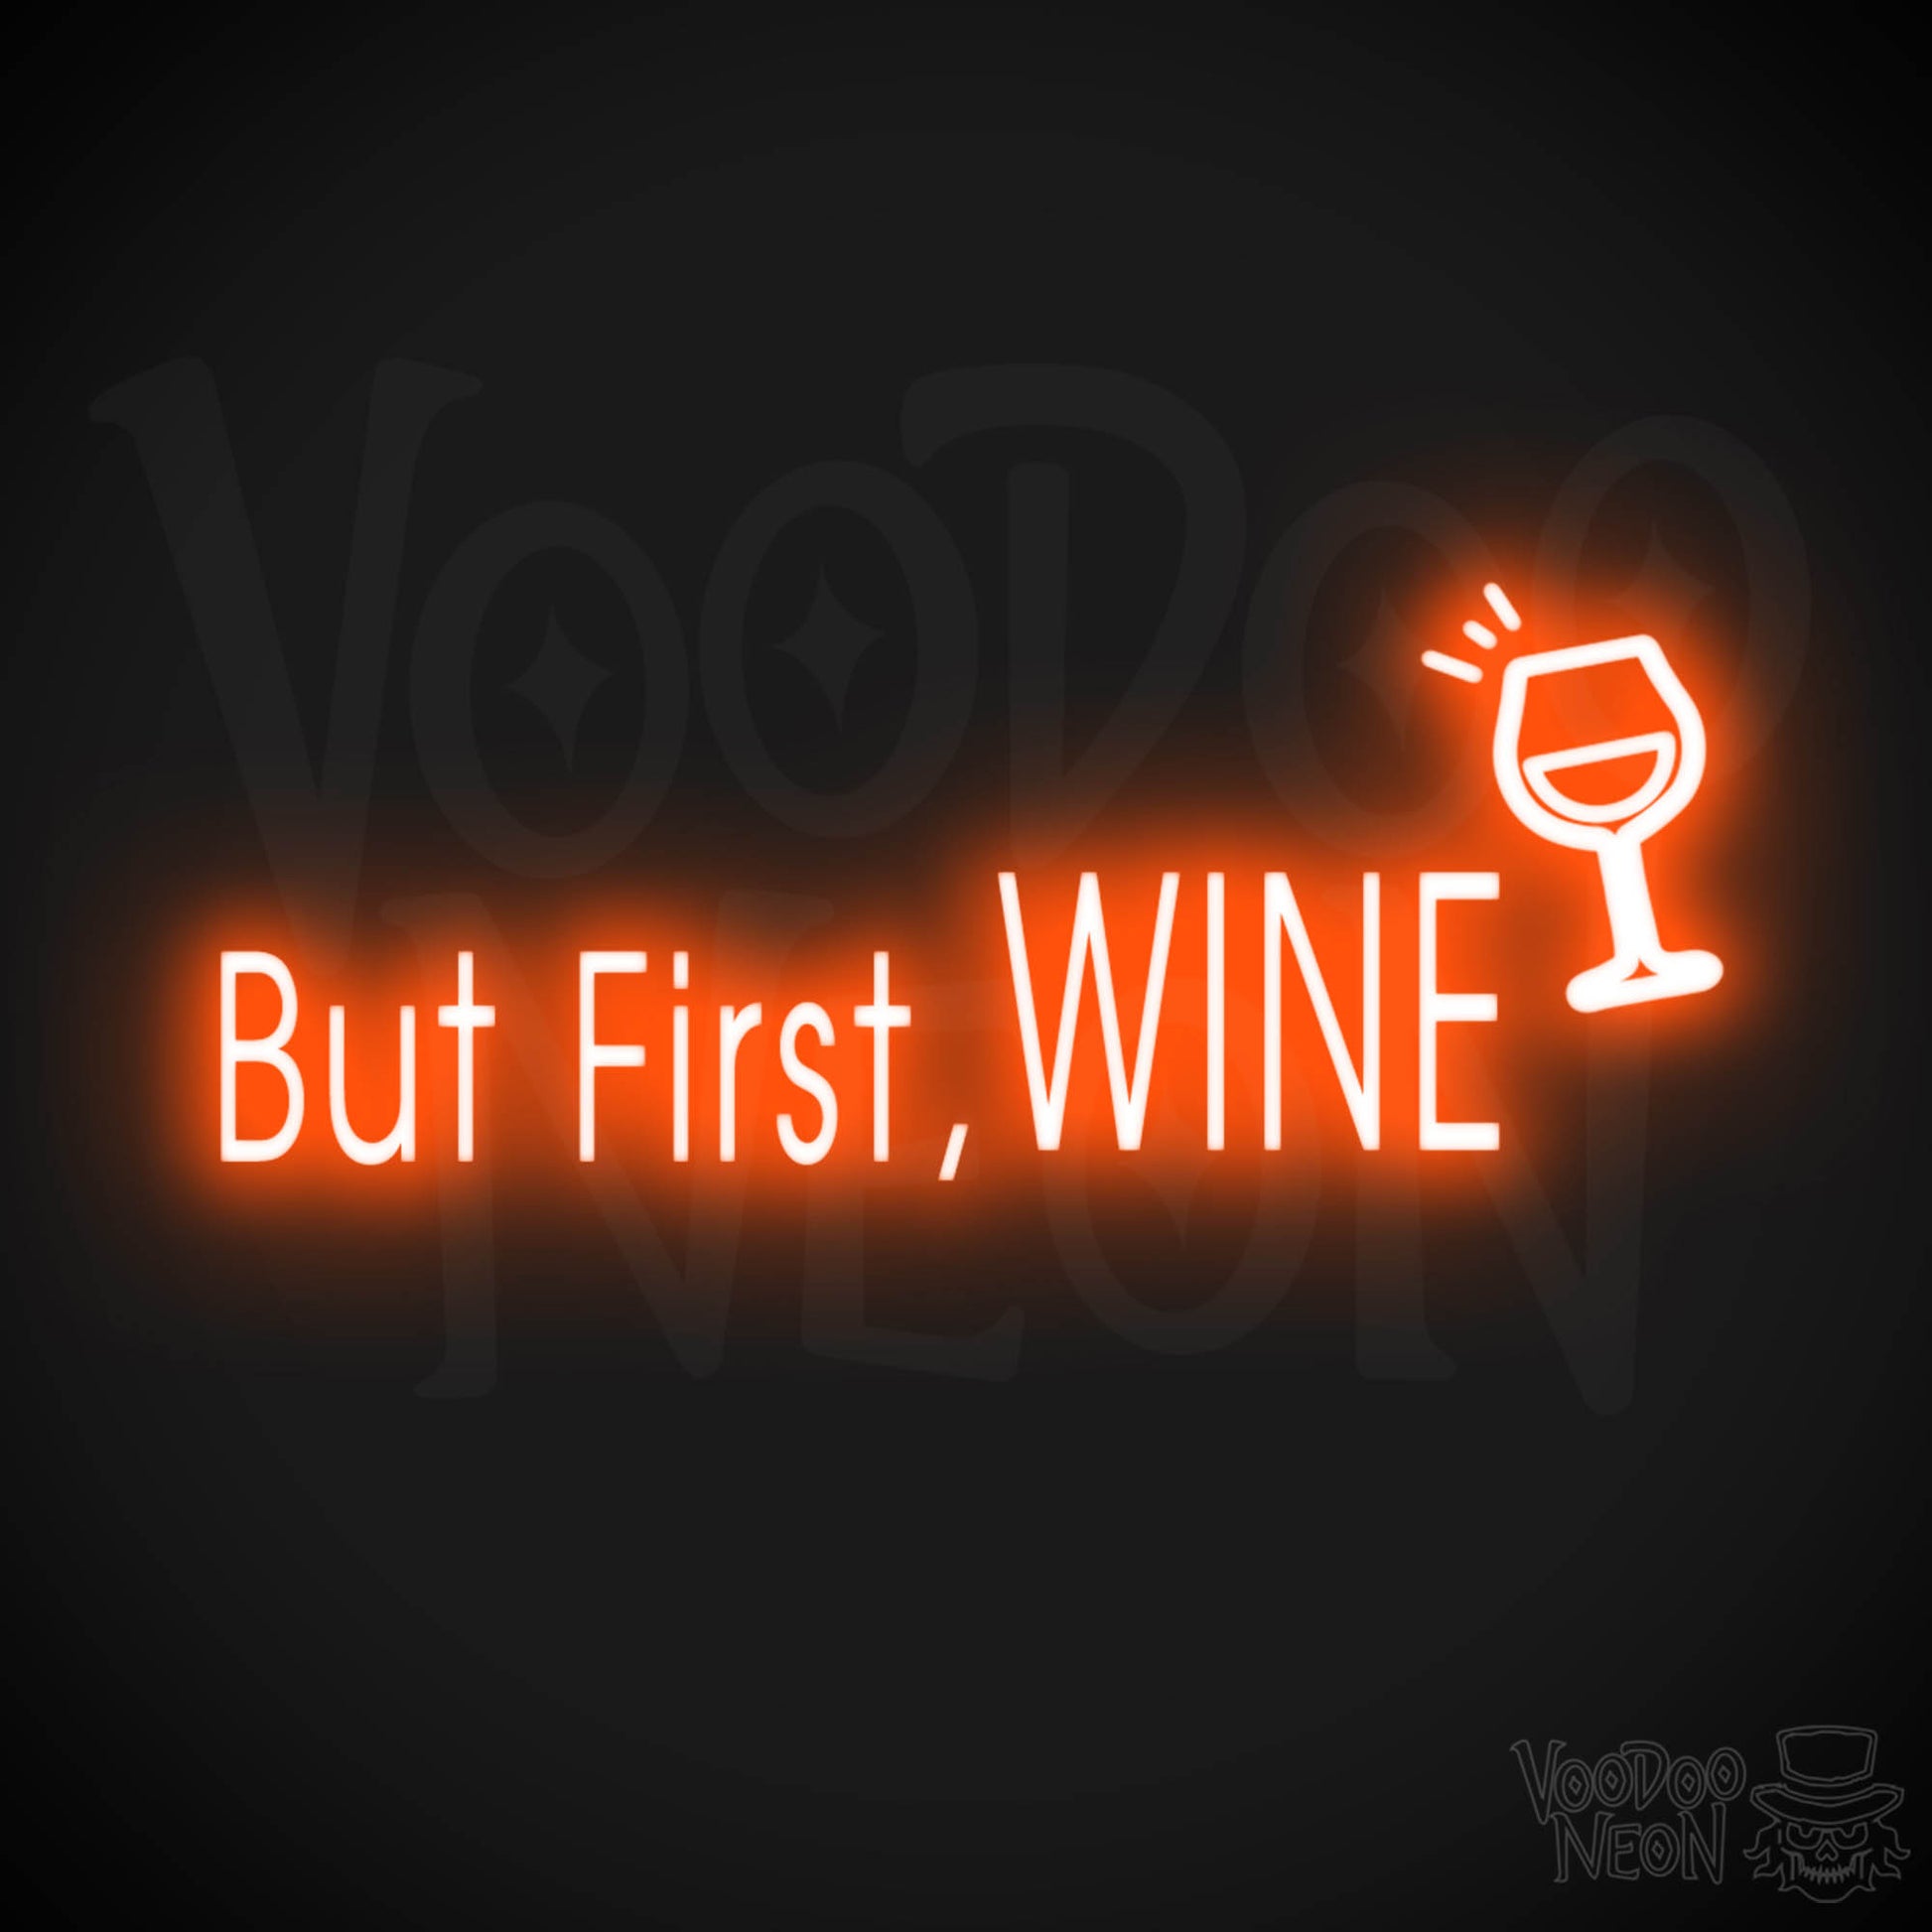 But First Wine Neon Sign - But First Wine Sign - Neon Wine Wall Art - Color Orange